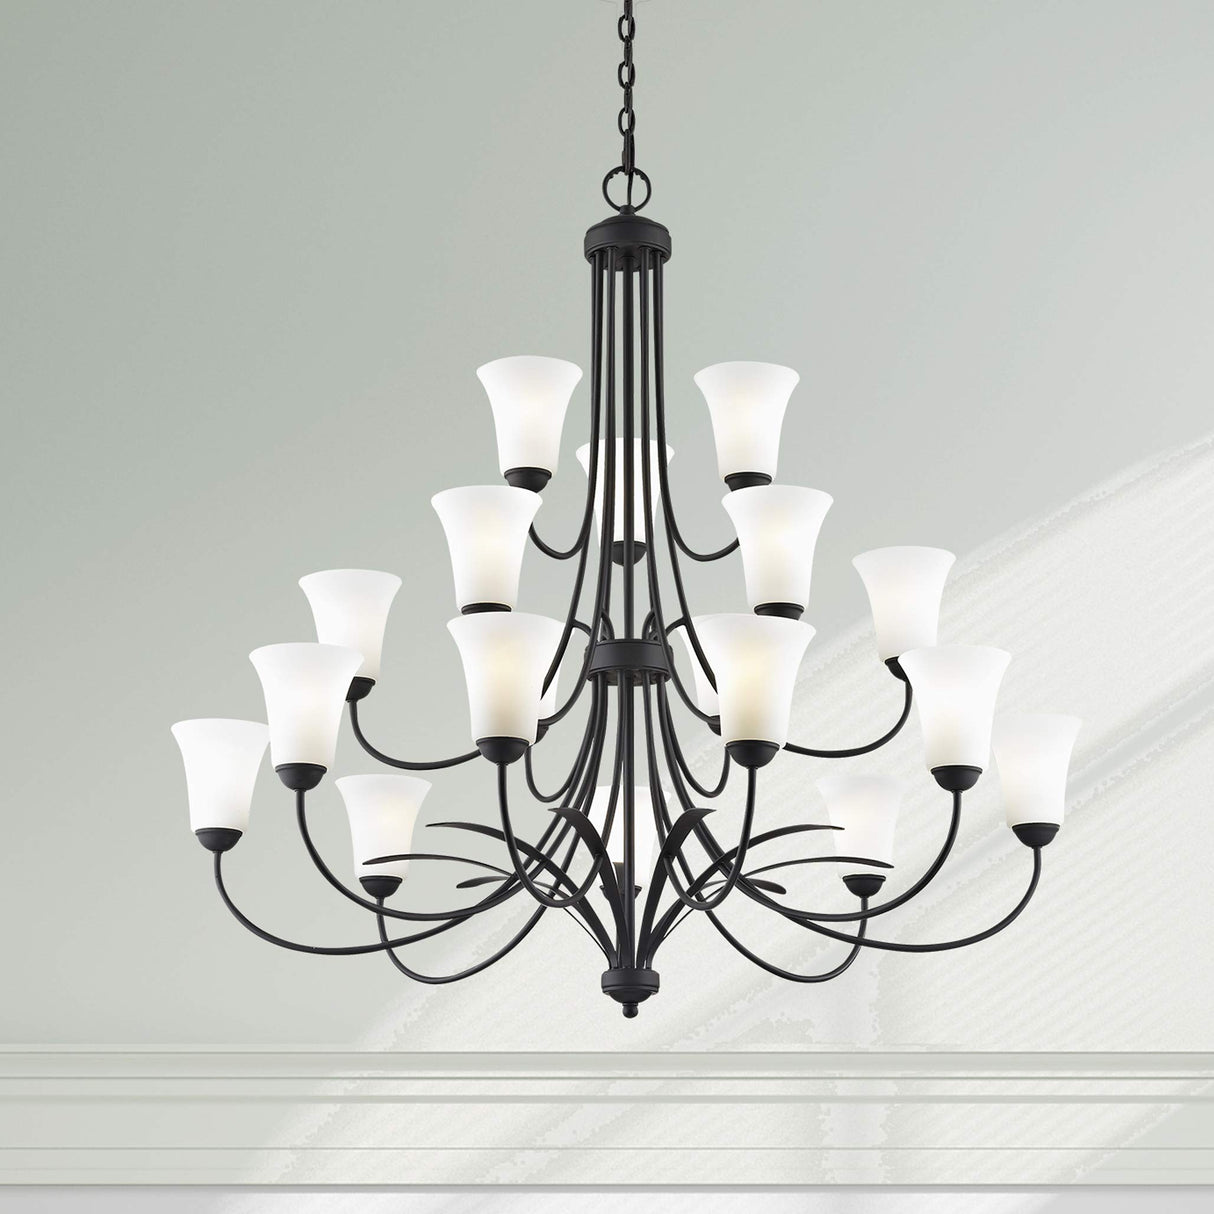 Livex Lighting 6479-04 Transitional 18 Light Chandelier from Ridgedale Collection in Black Finish